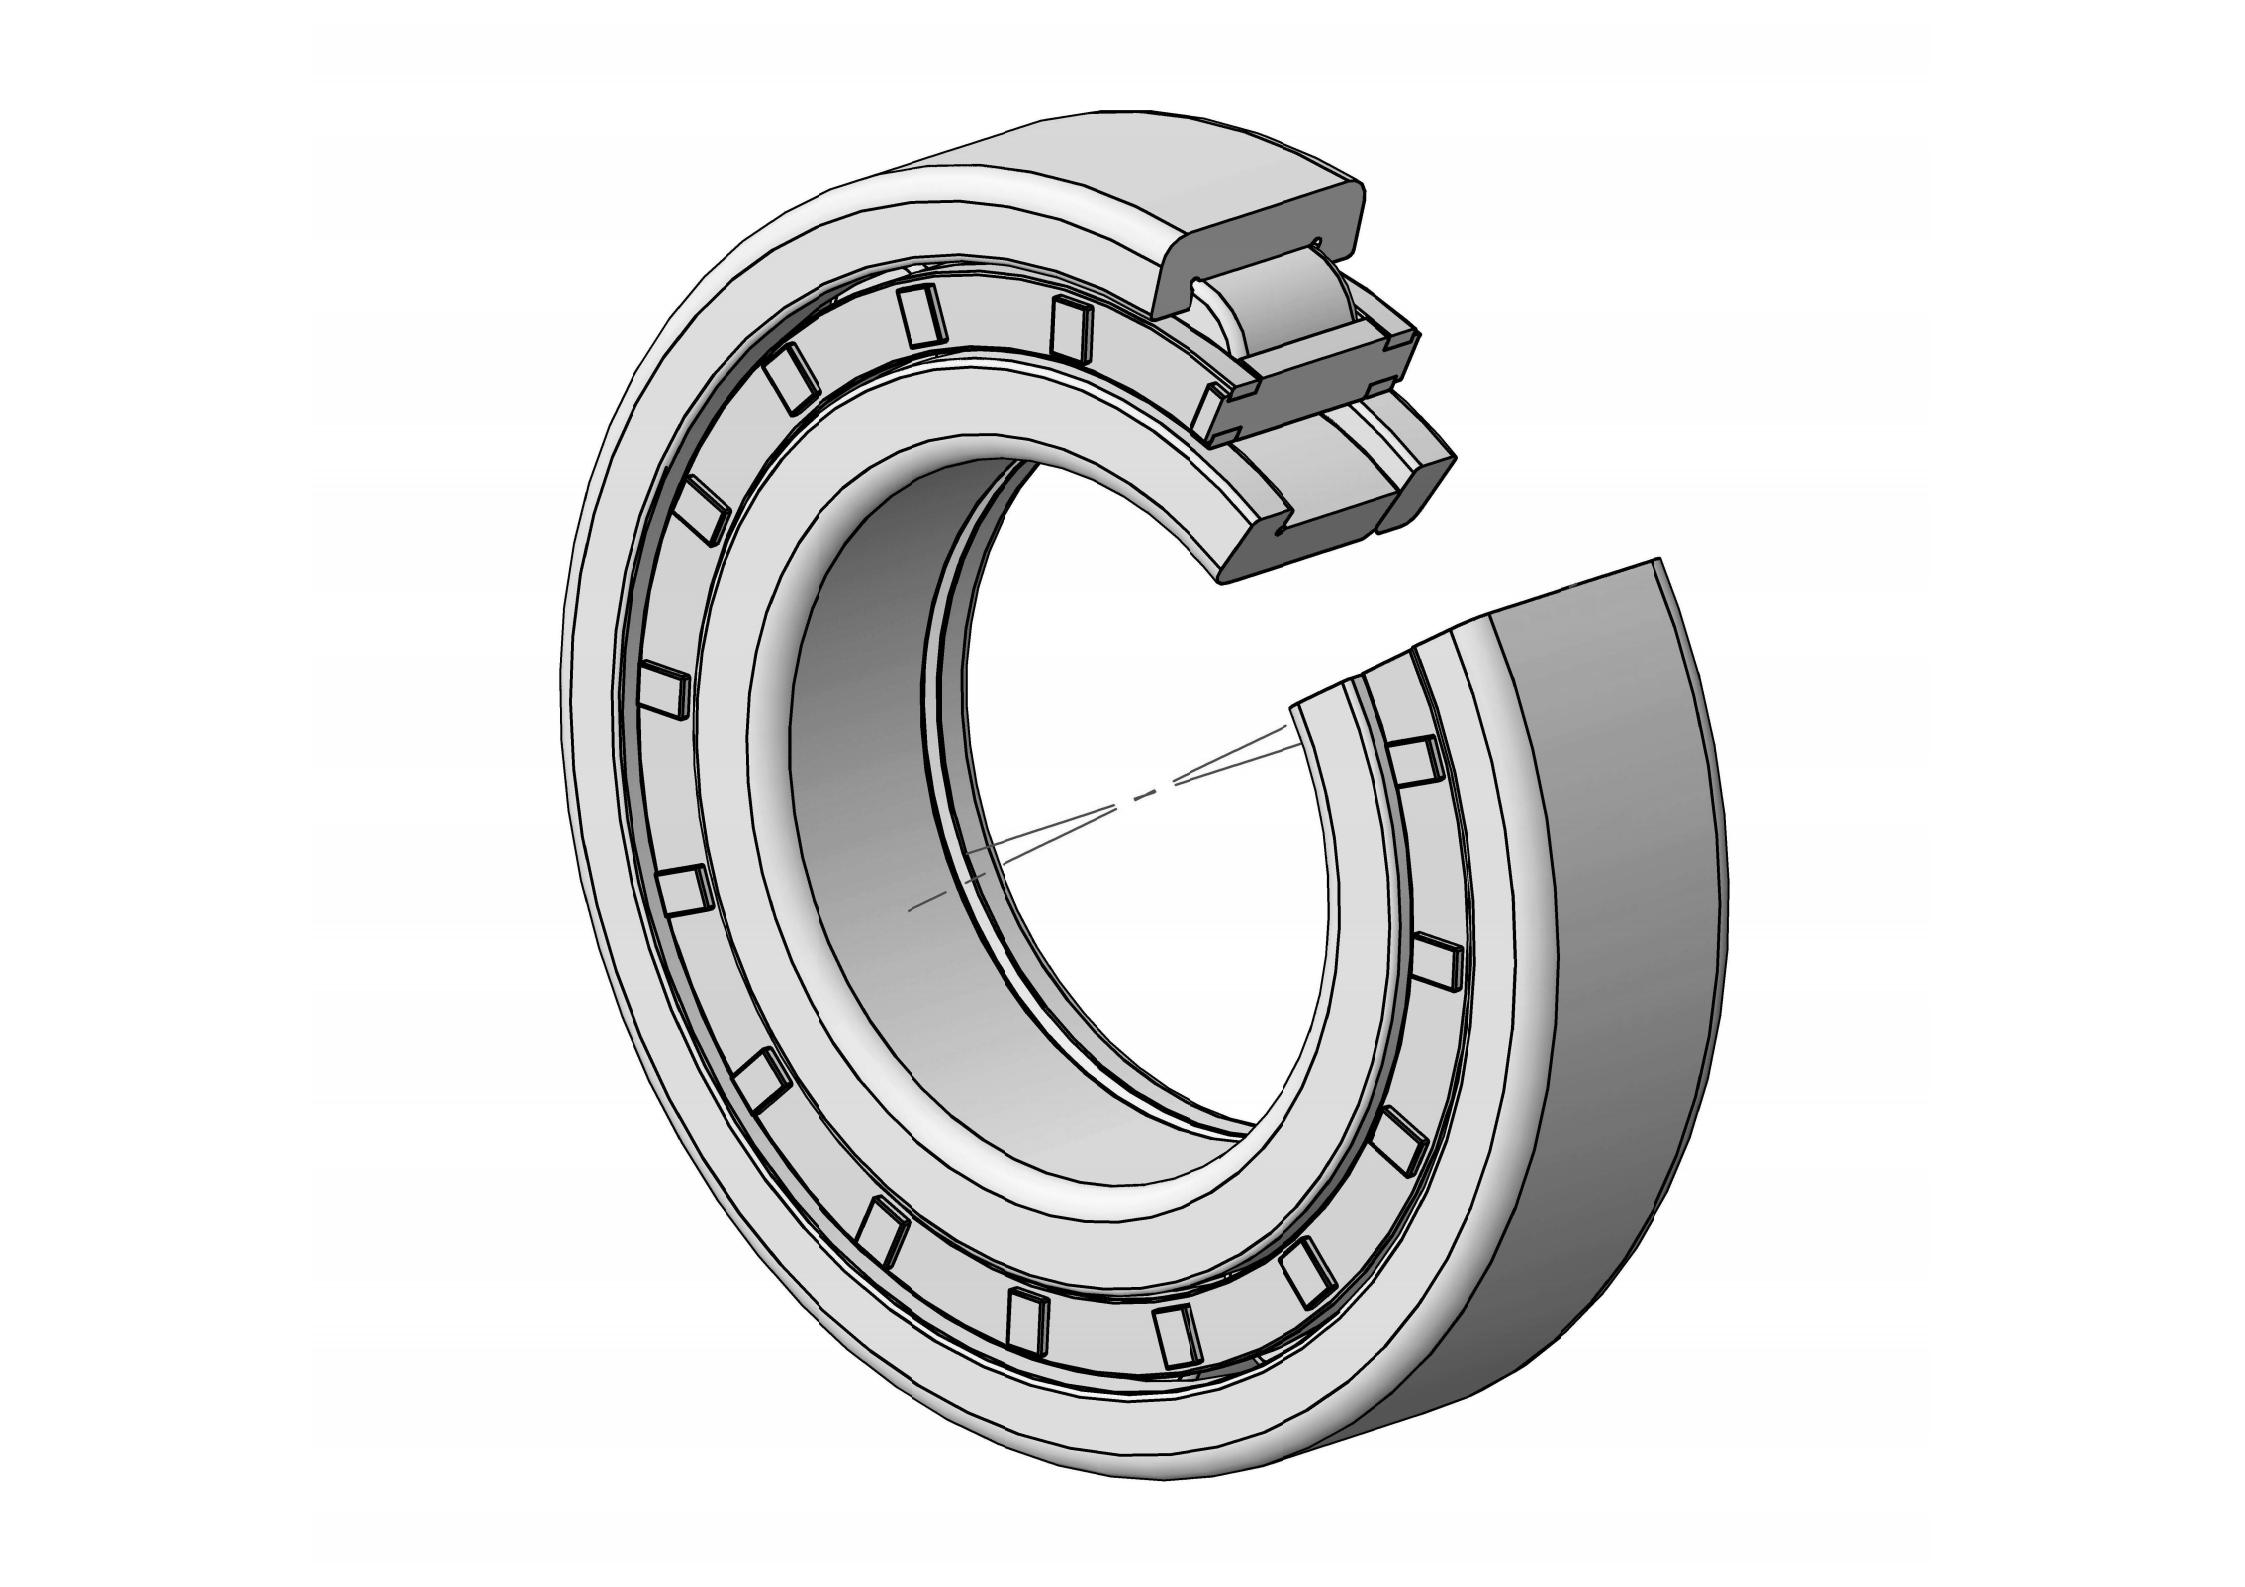 NUP2318-EM Single Row Cylindrical roller bearing 